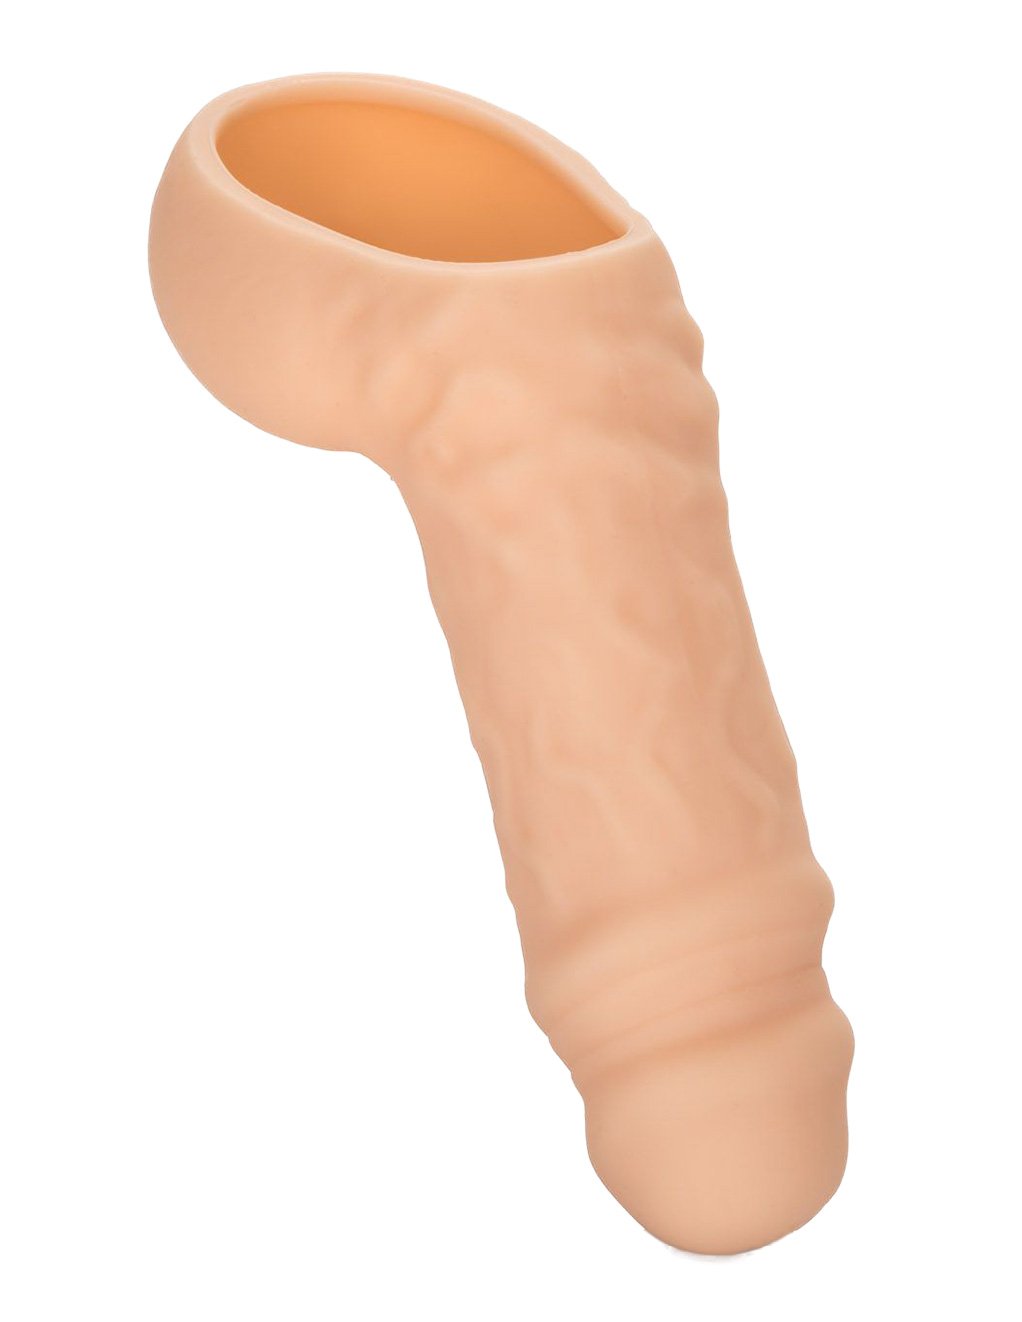 Packer Gear Silicone Hollow Packer Penis- Ivory- Top